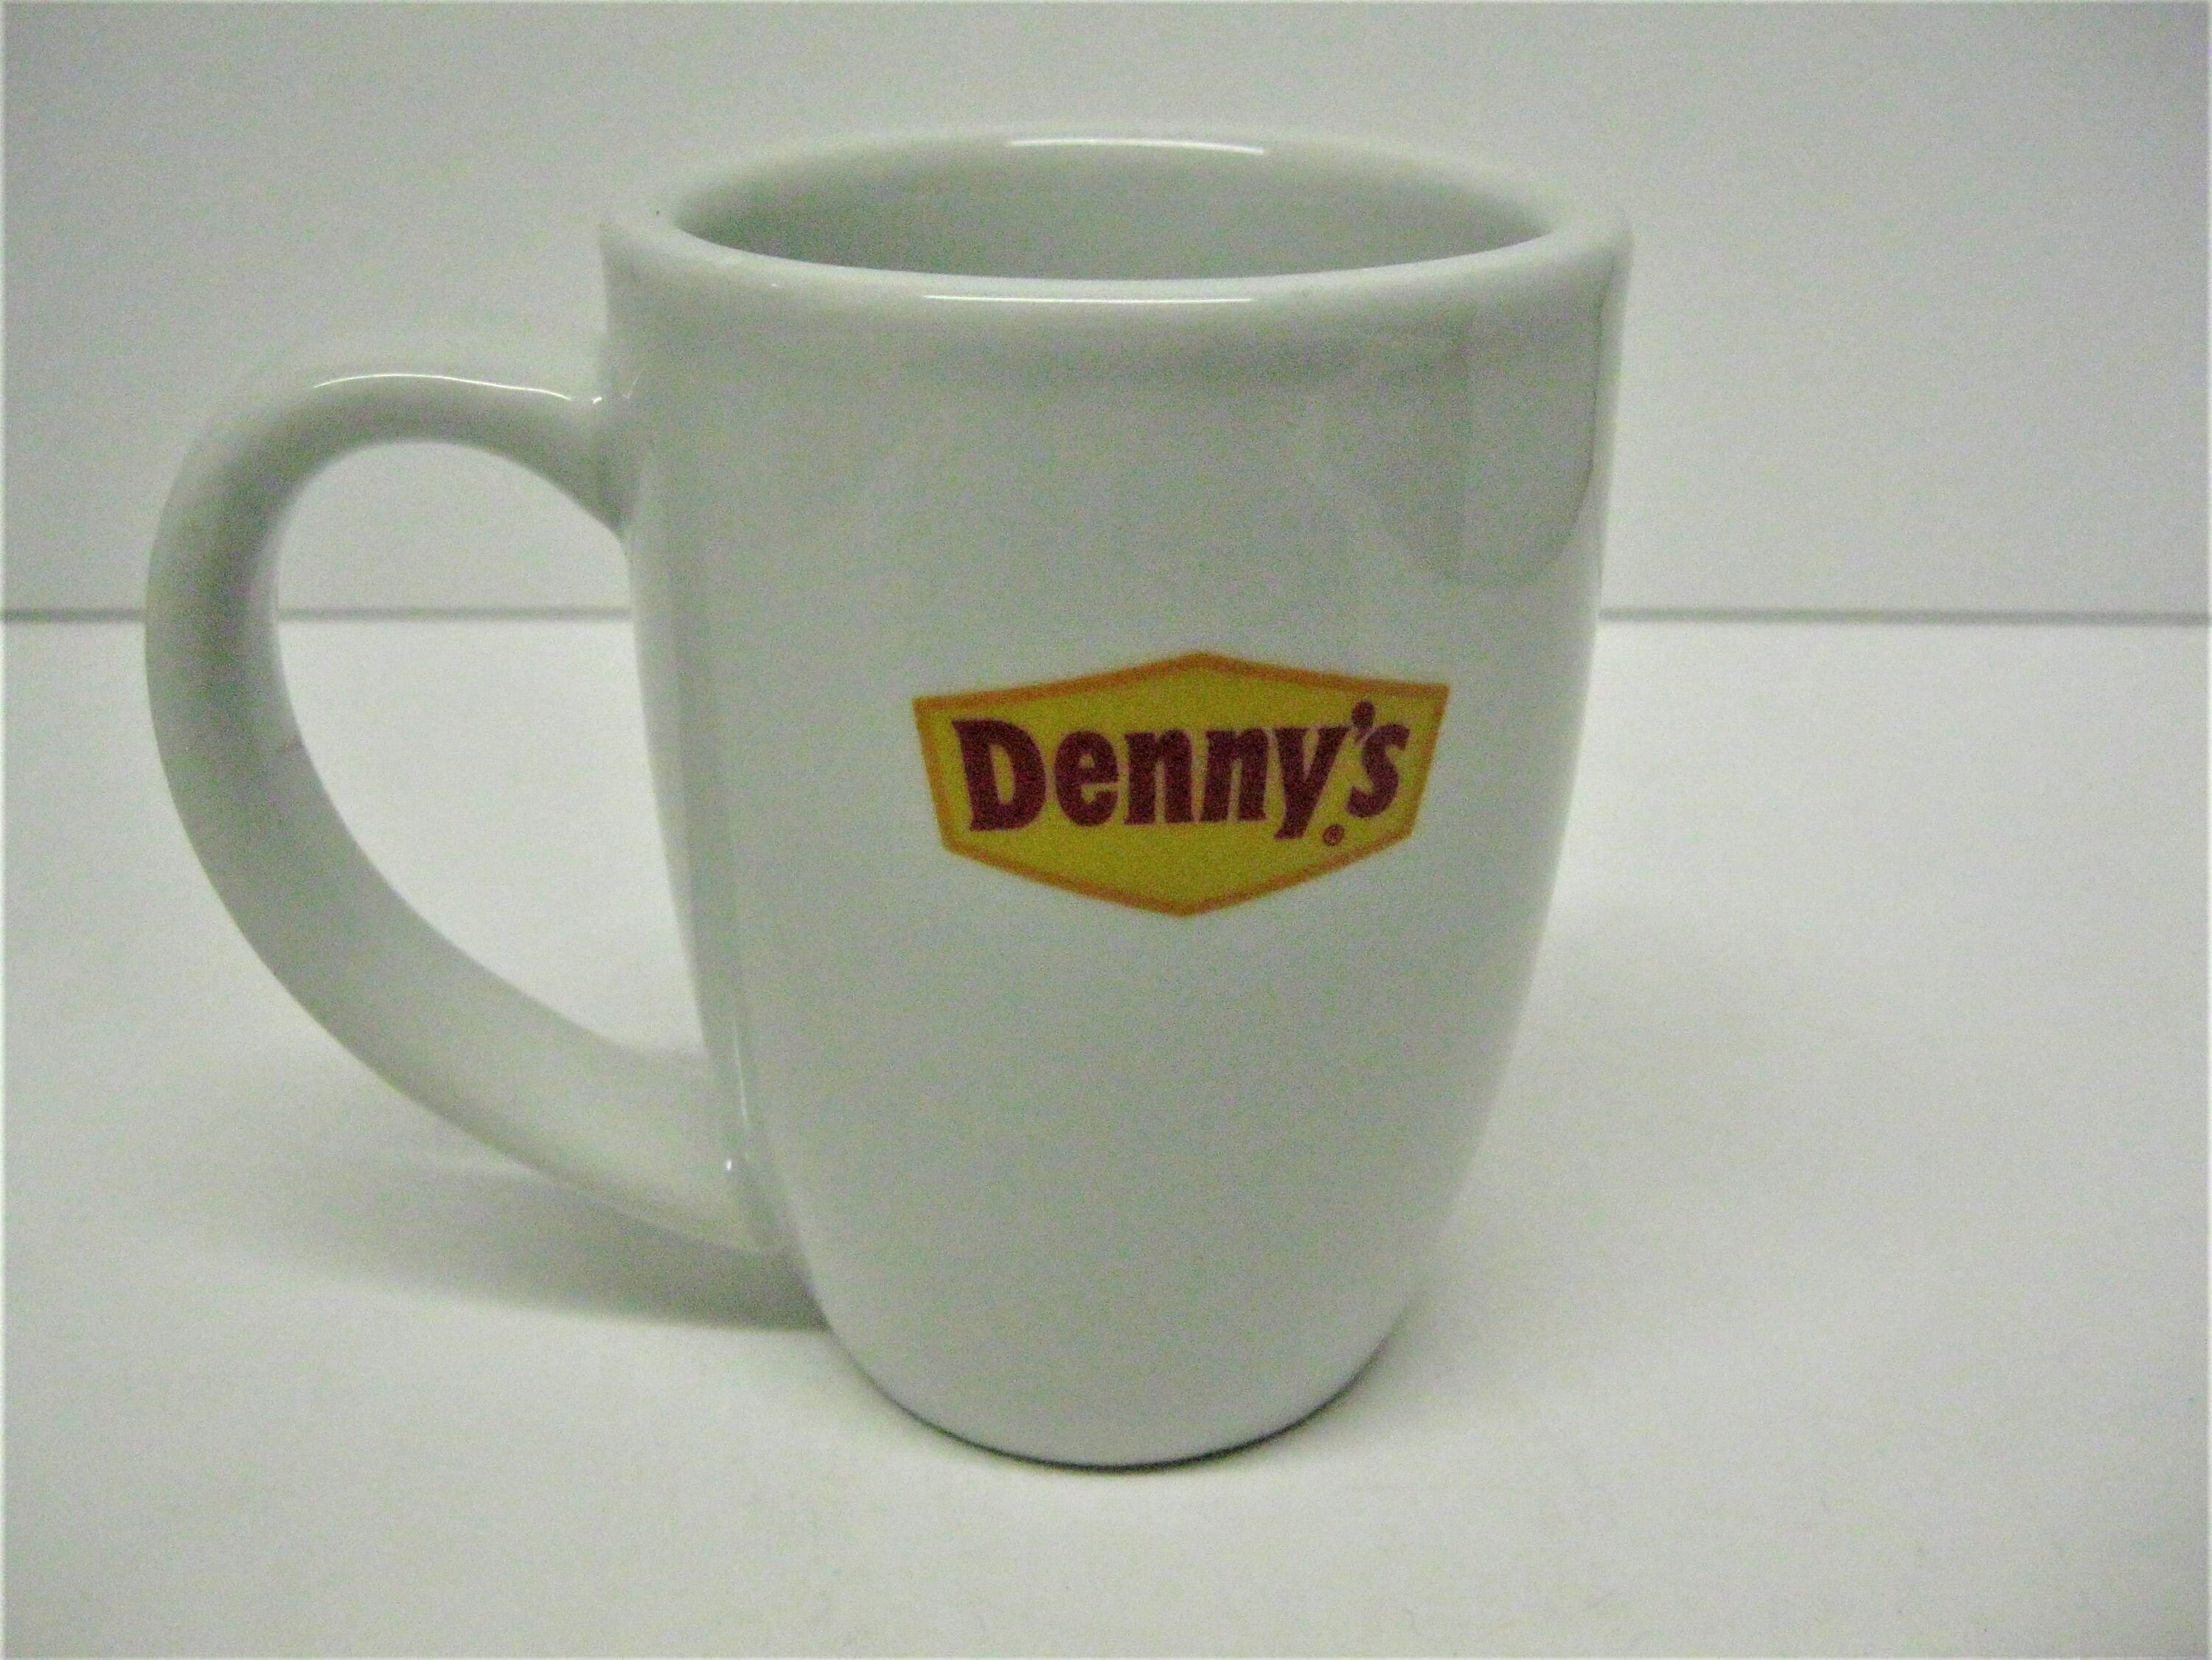 Search results  Find the available job openings at Denny's